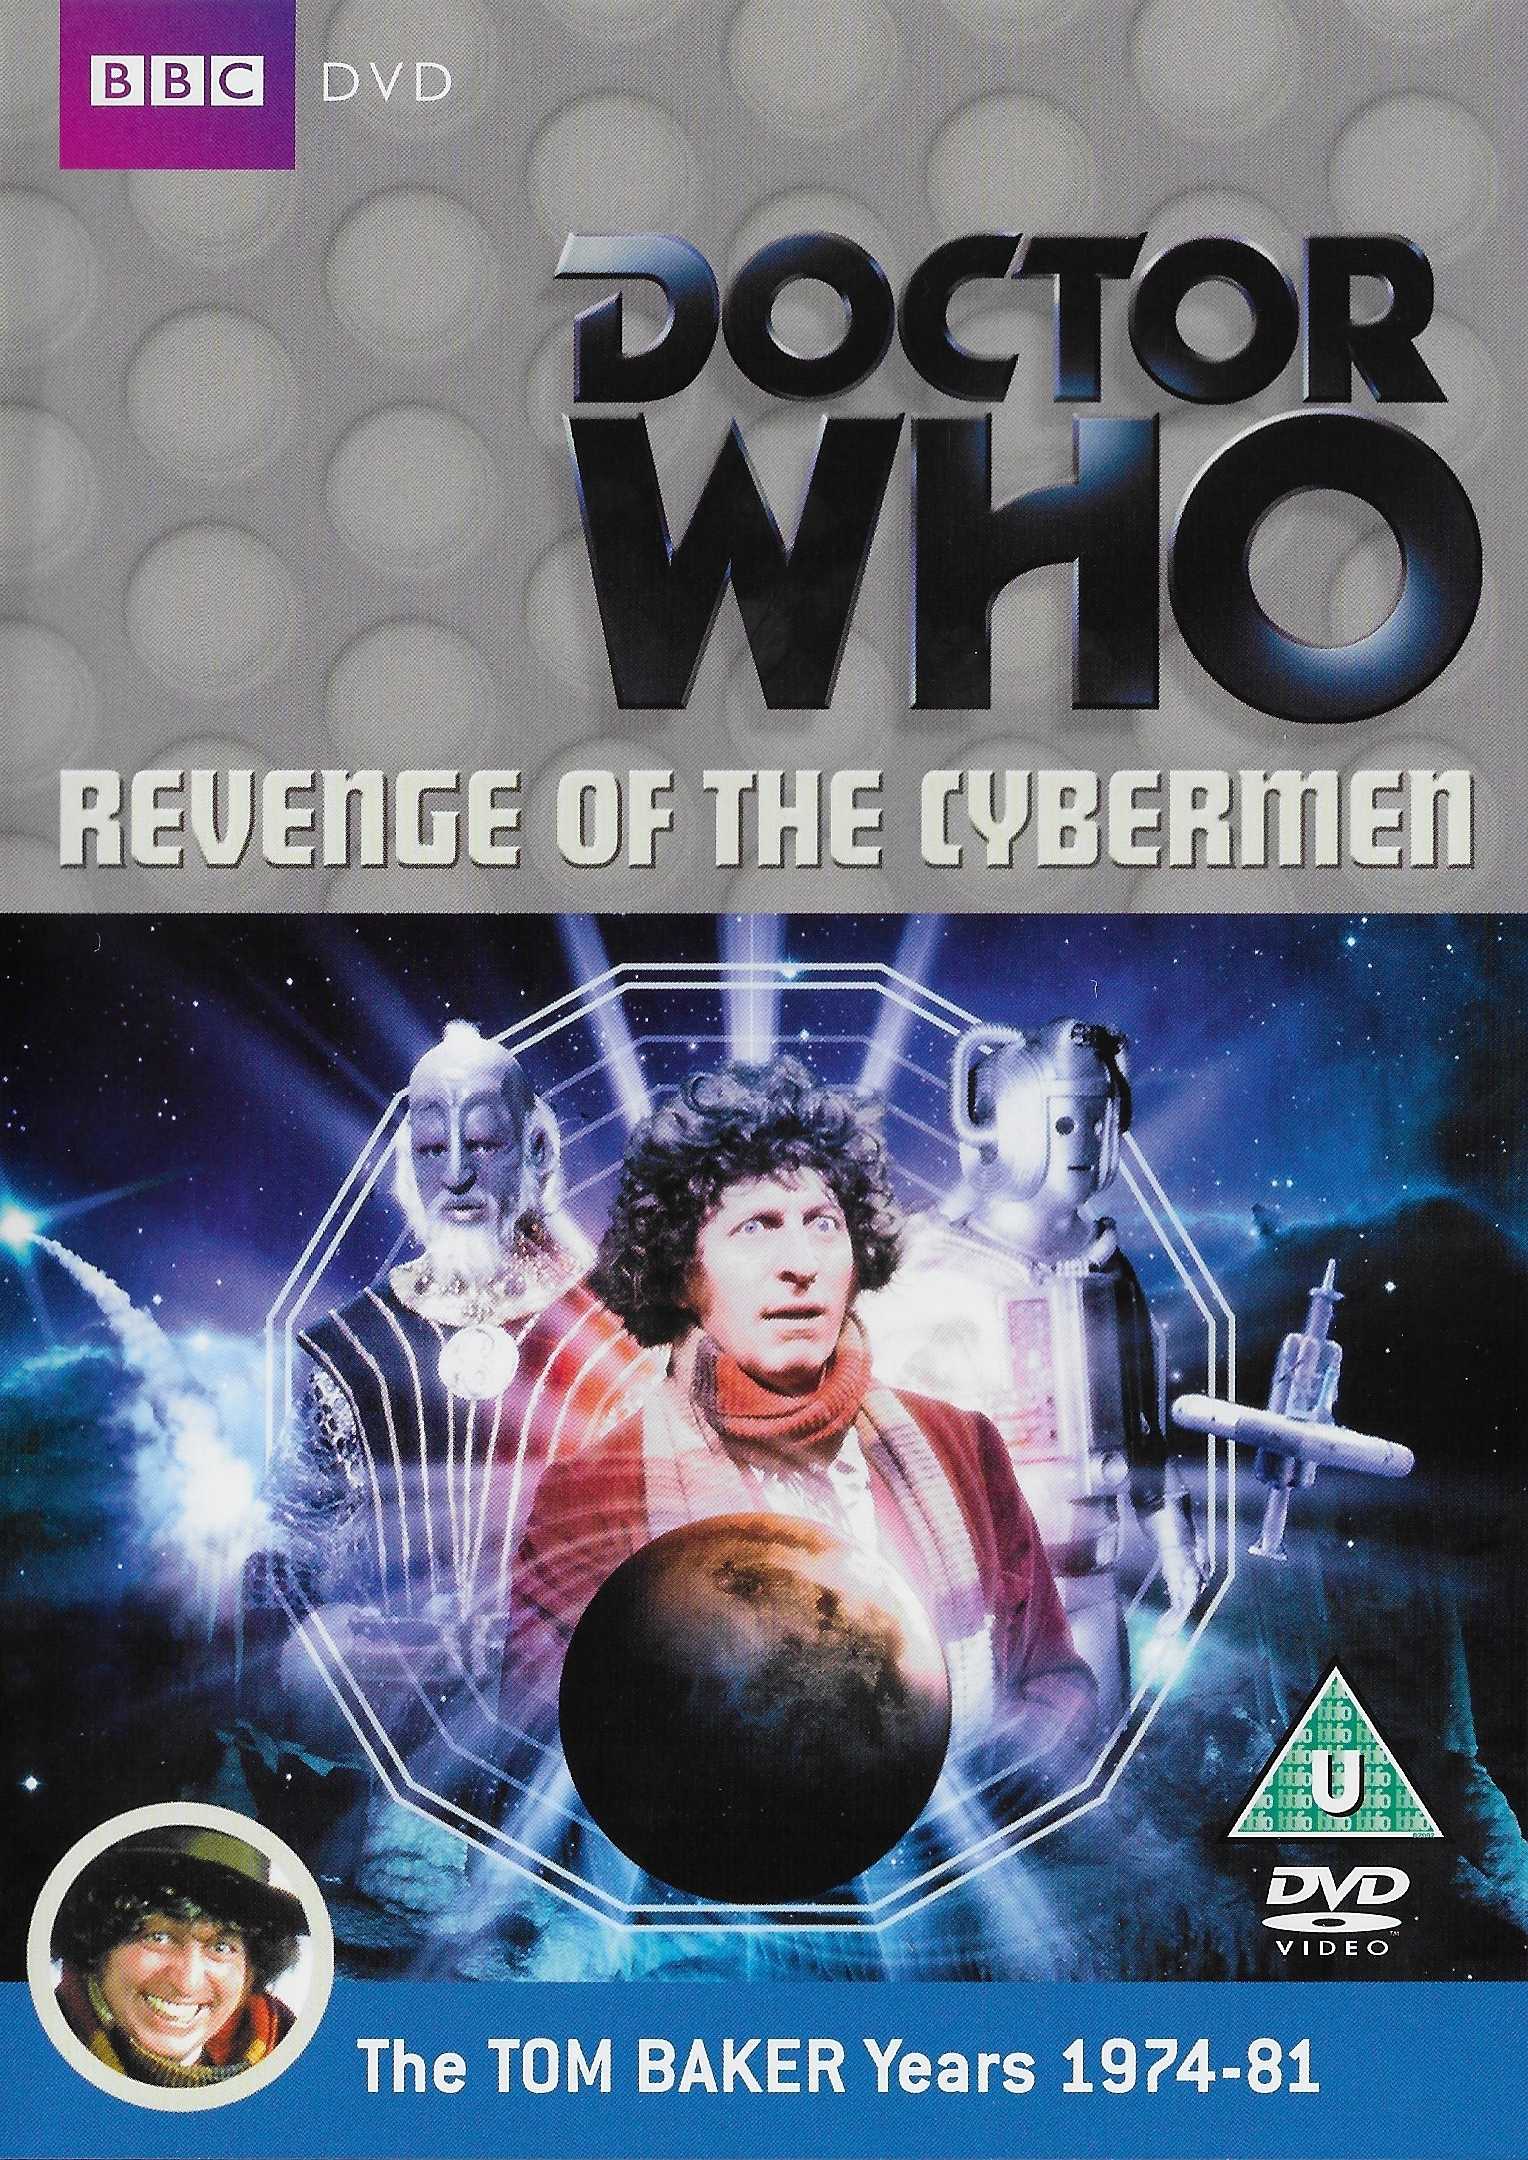 Picture of BBCDVD 2854A Doctor Who - Revenge of the Cybermen by artist Gerry Davis from the BBC dvds - Records and Tapes library